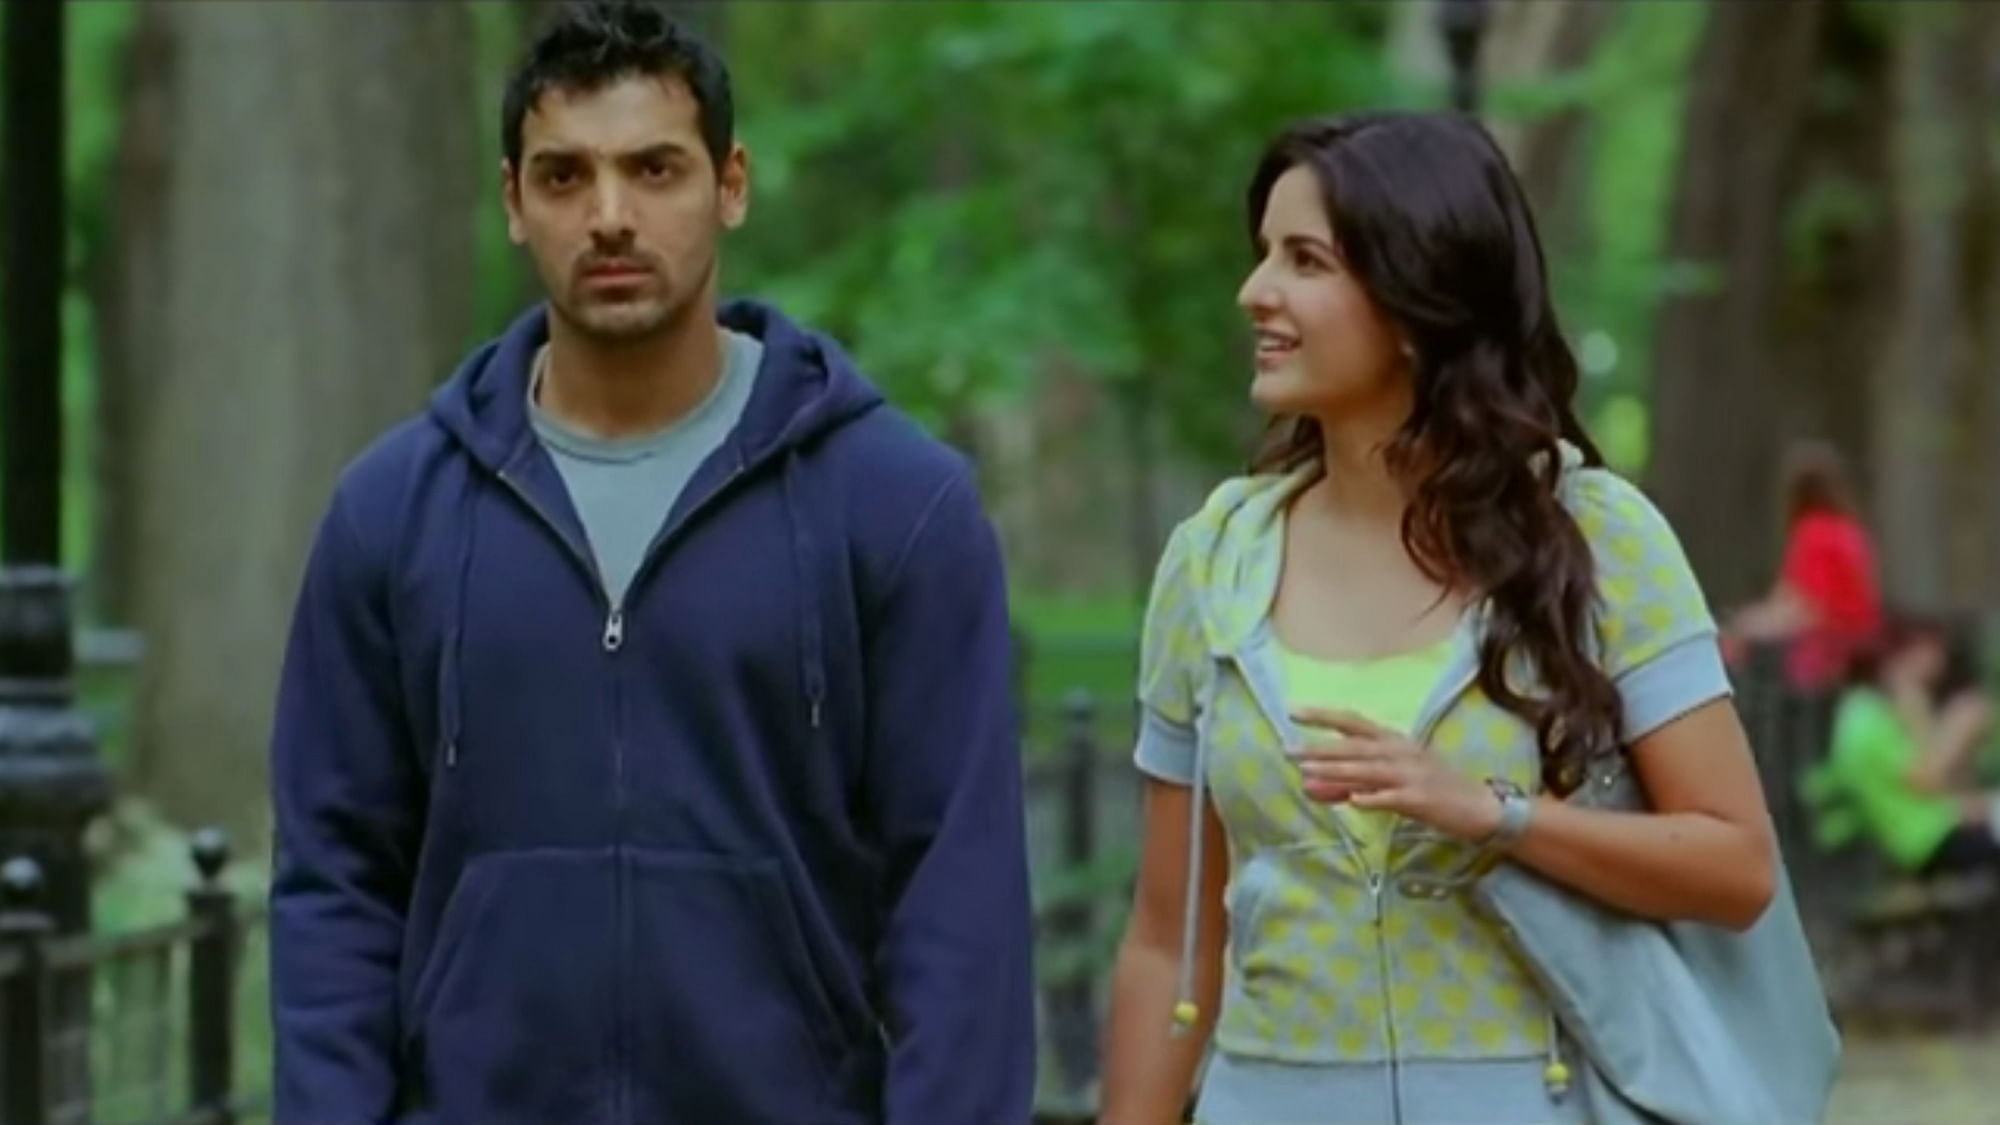 A still from the movie <i>New York</i>, where John Abraham suffers from PTSD after undergoing torture. (Photo Courtesy: YouTube screenshot)